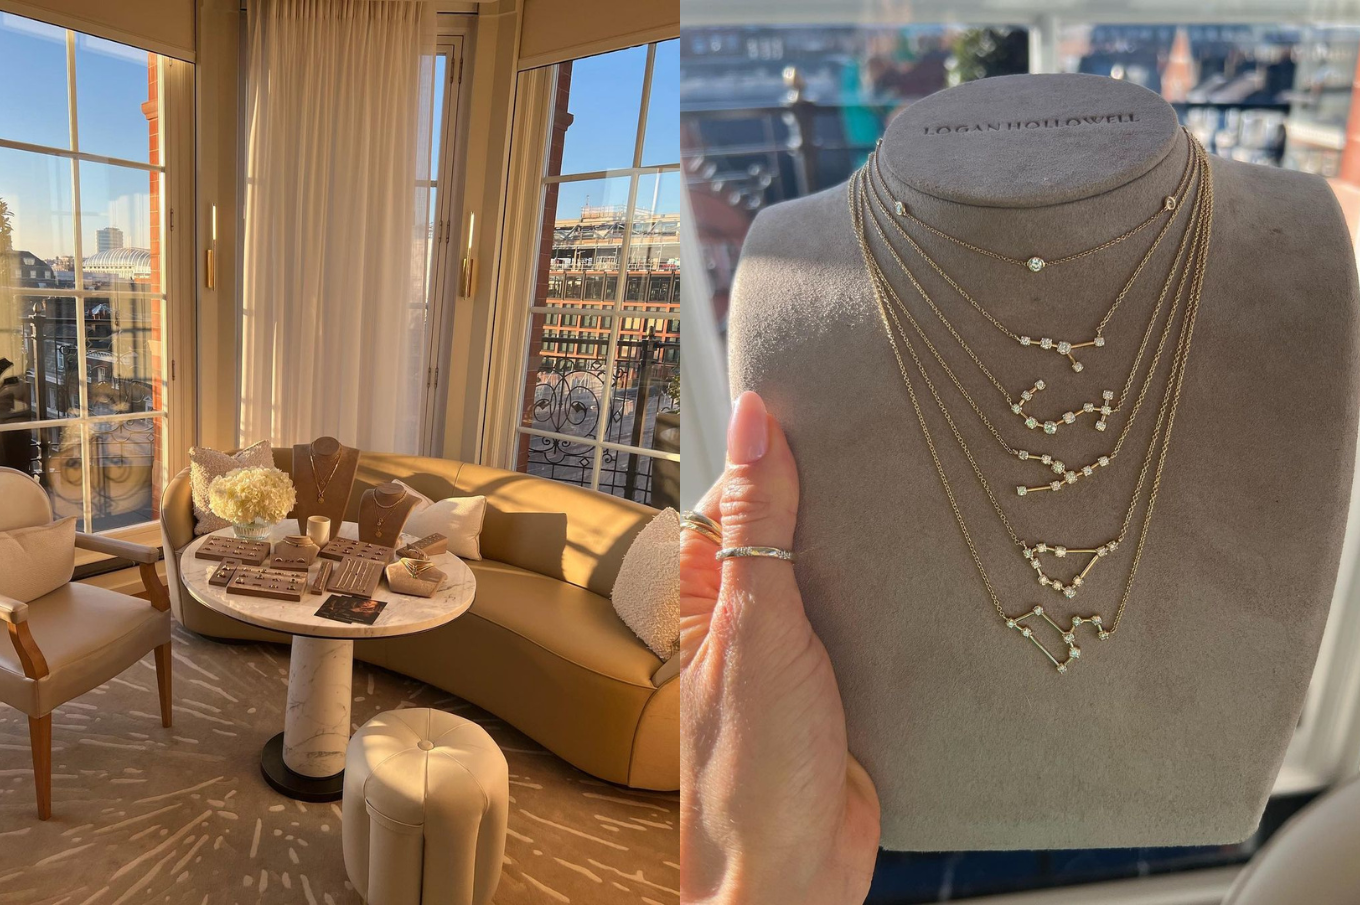 Left: London hotel suite with LH jewelry on display / Neck display with constellation necklaces on 